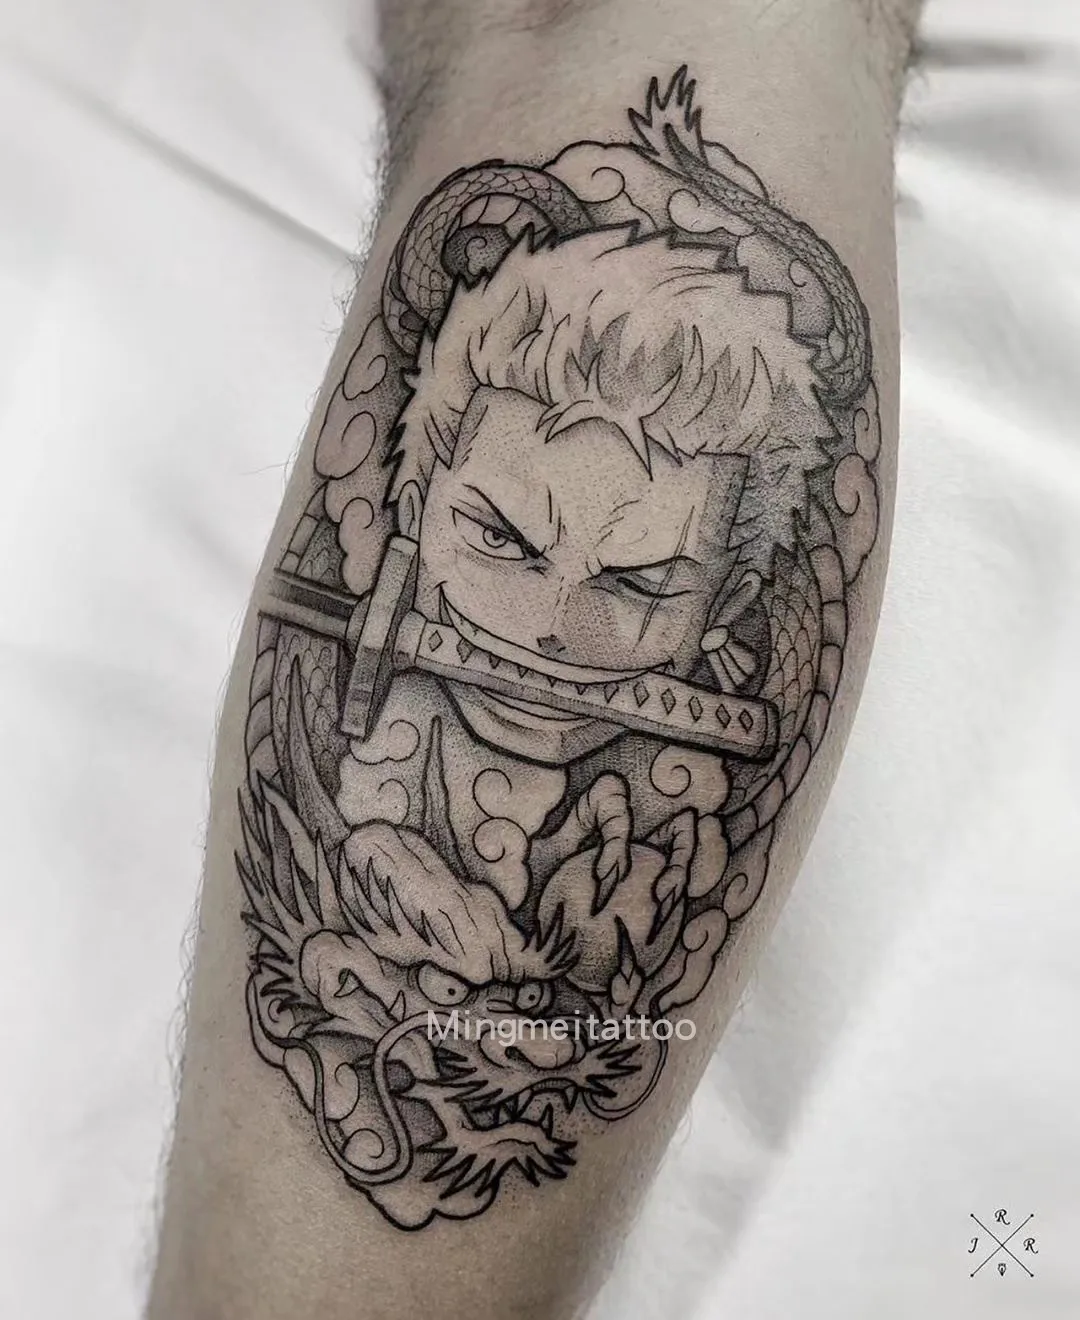 My name is moguel and i love doing anime tattoos along with all other    TikTok